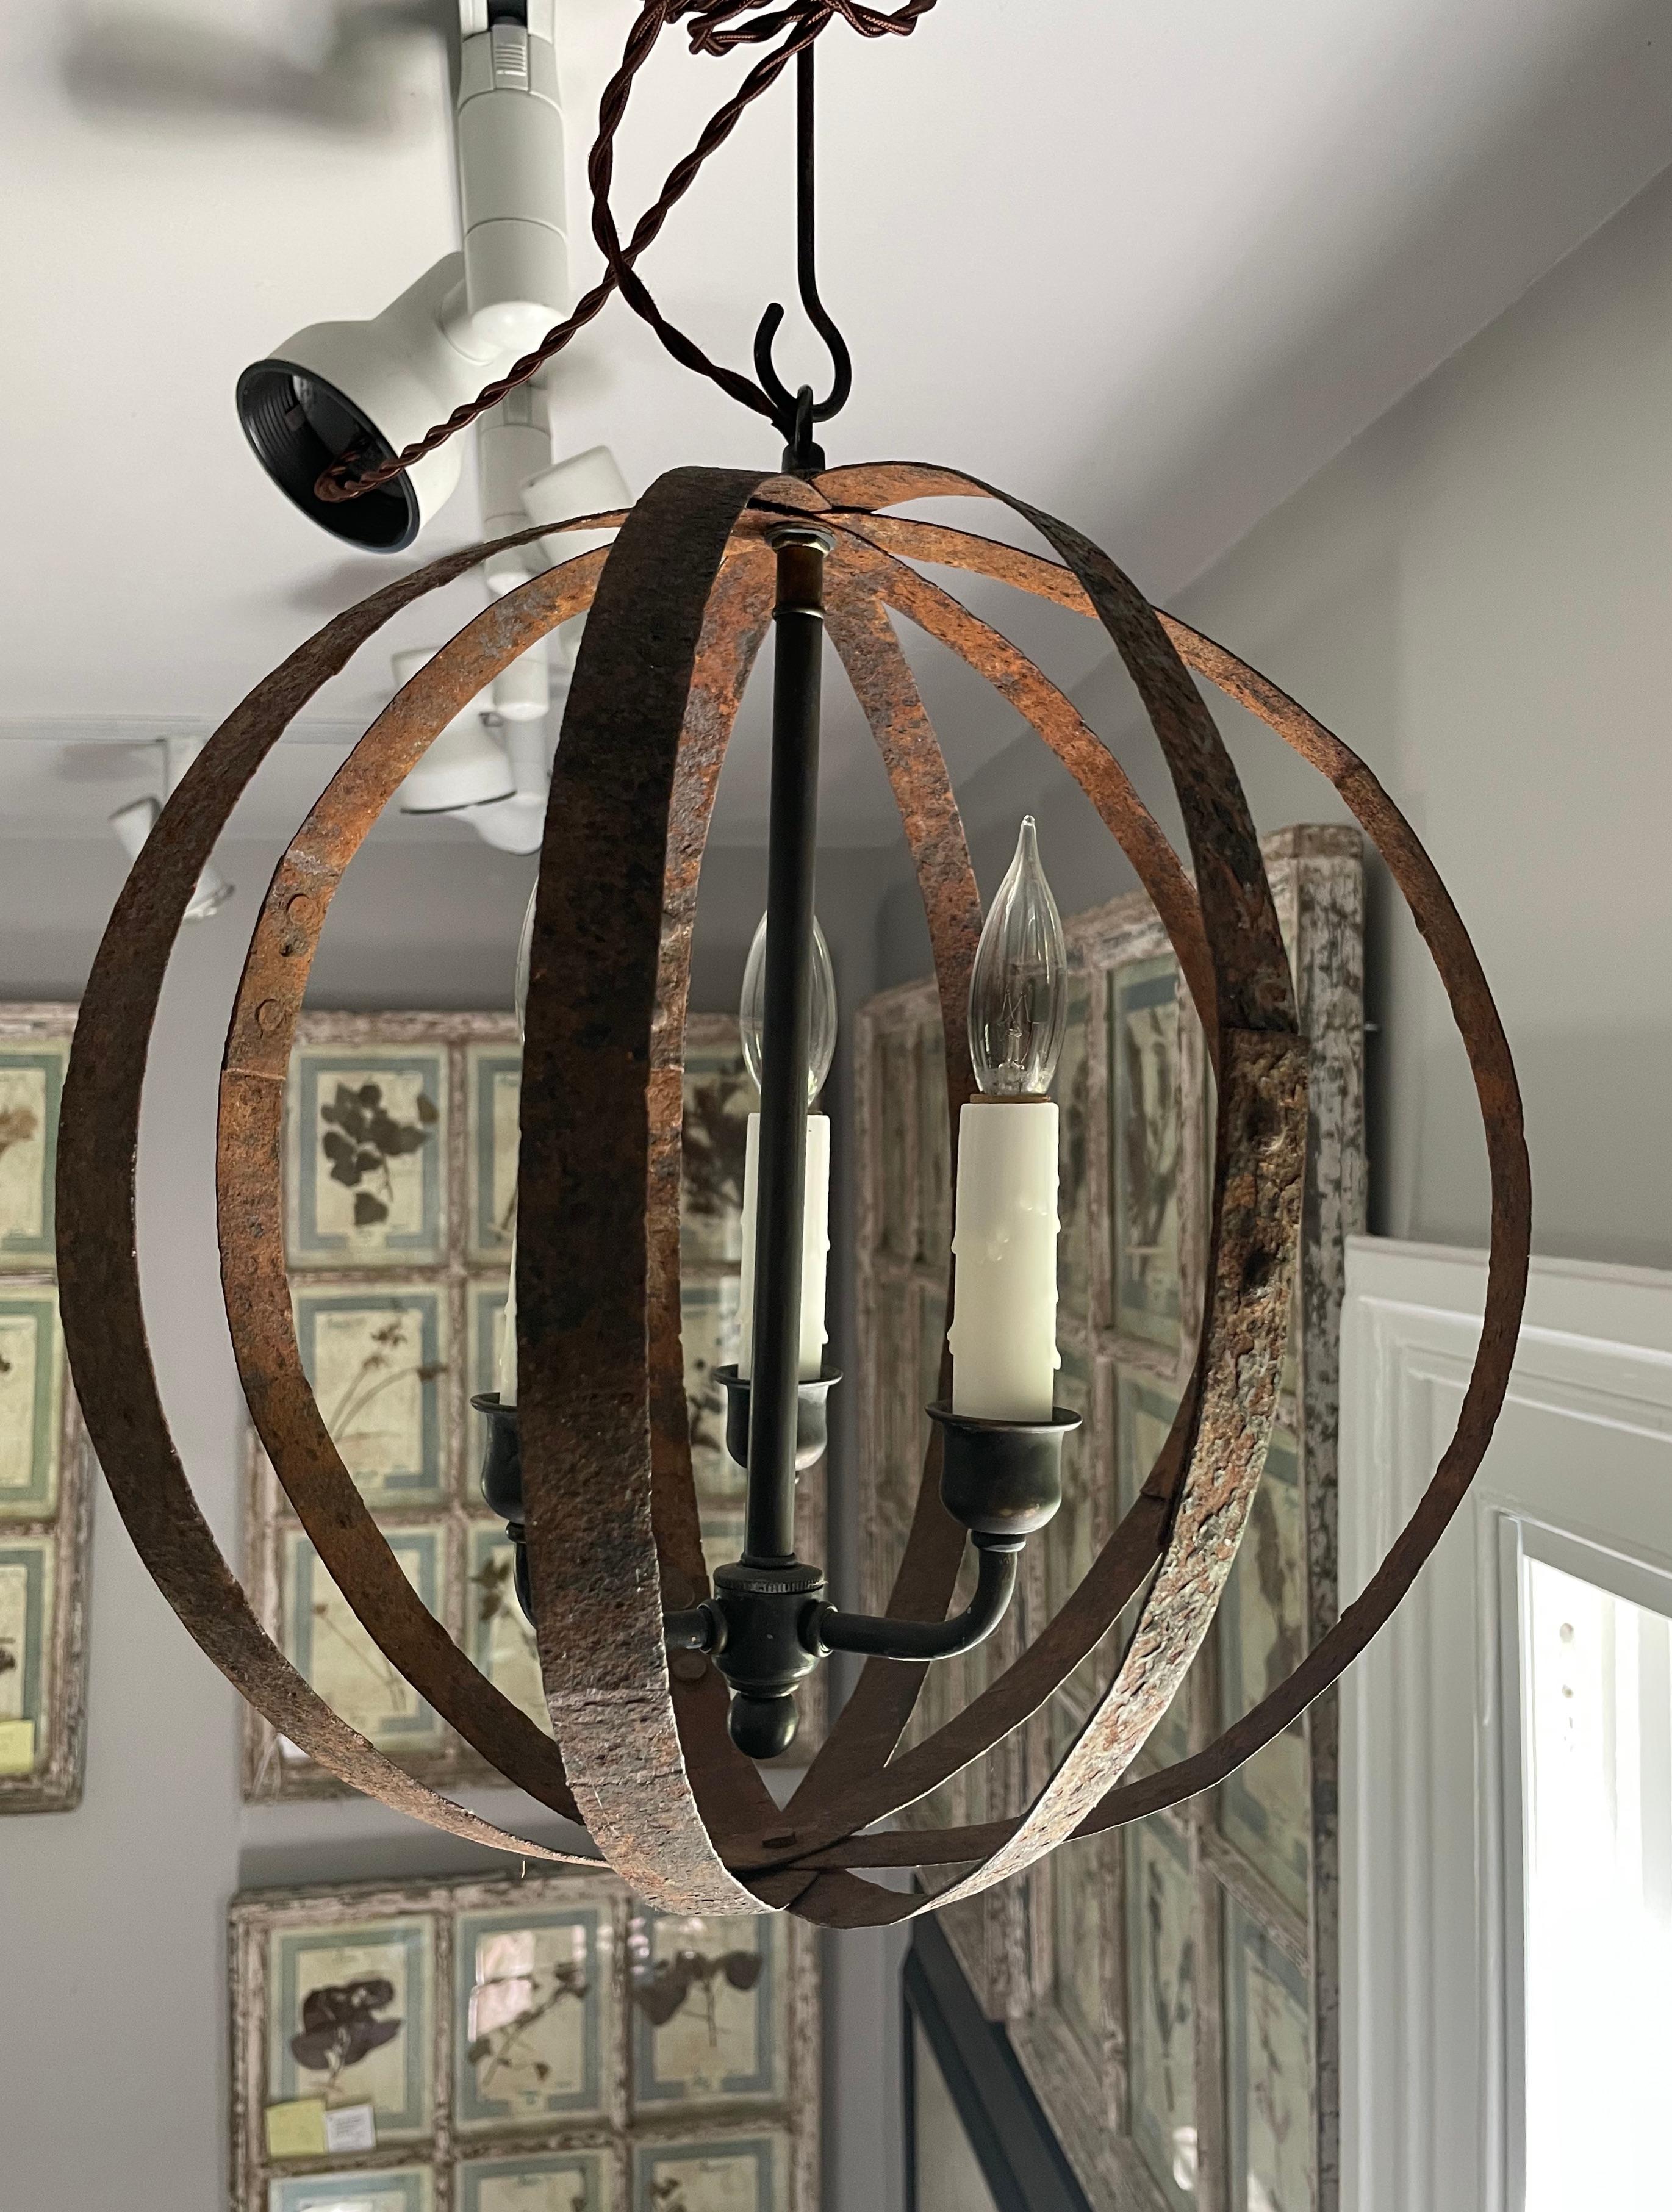 19th C French Wrought Iron Spherical Chandelier #1 3